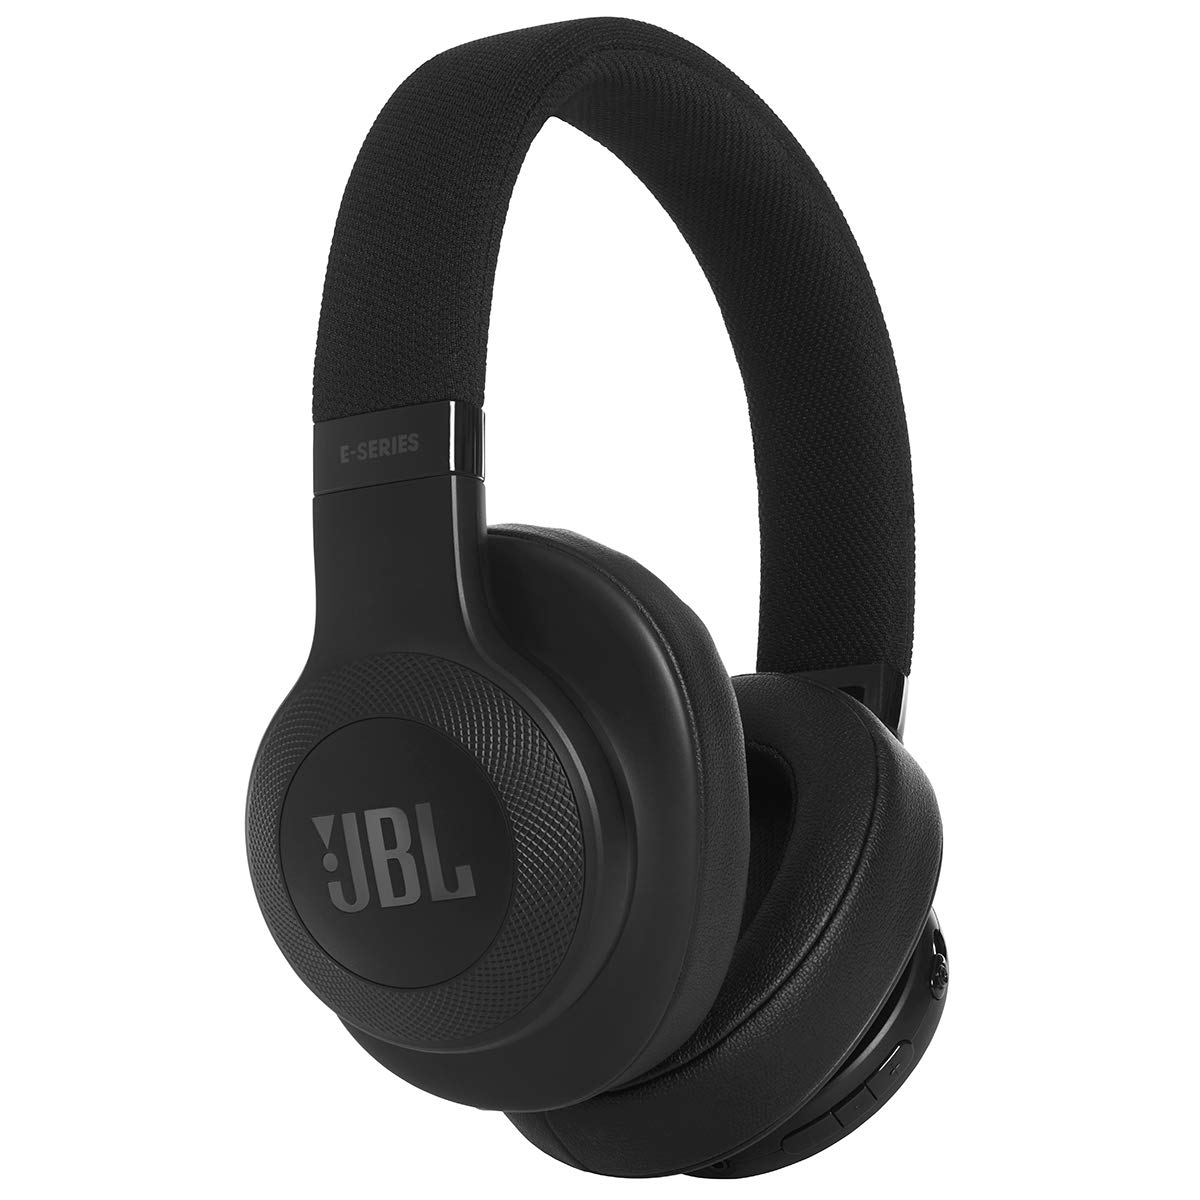 Auriculares bluetooth JBL solo 69€